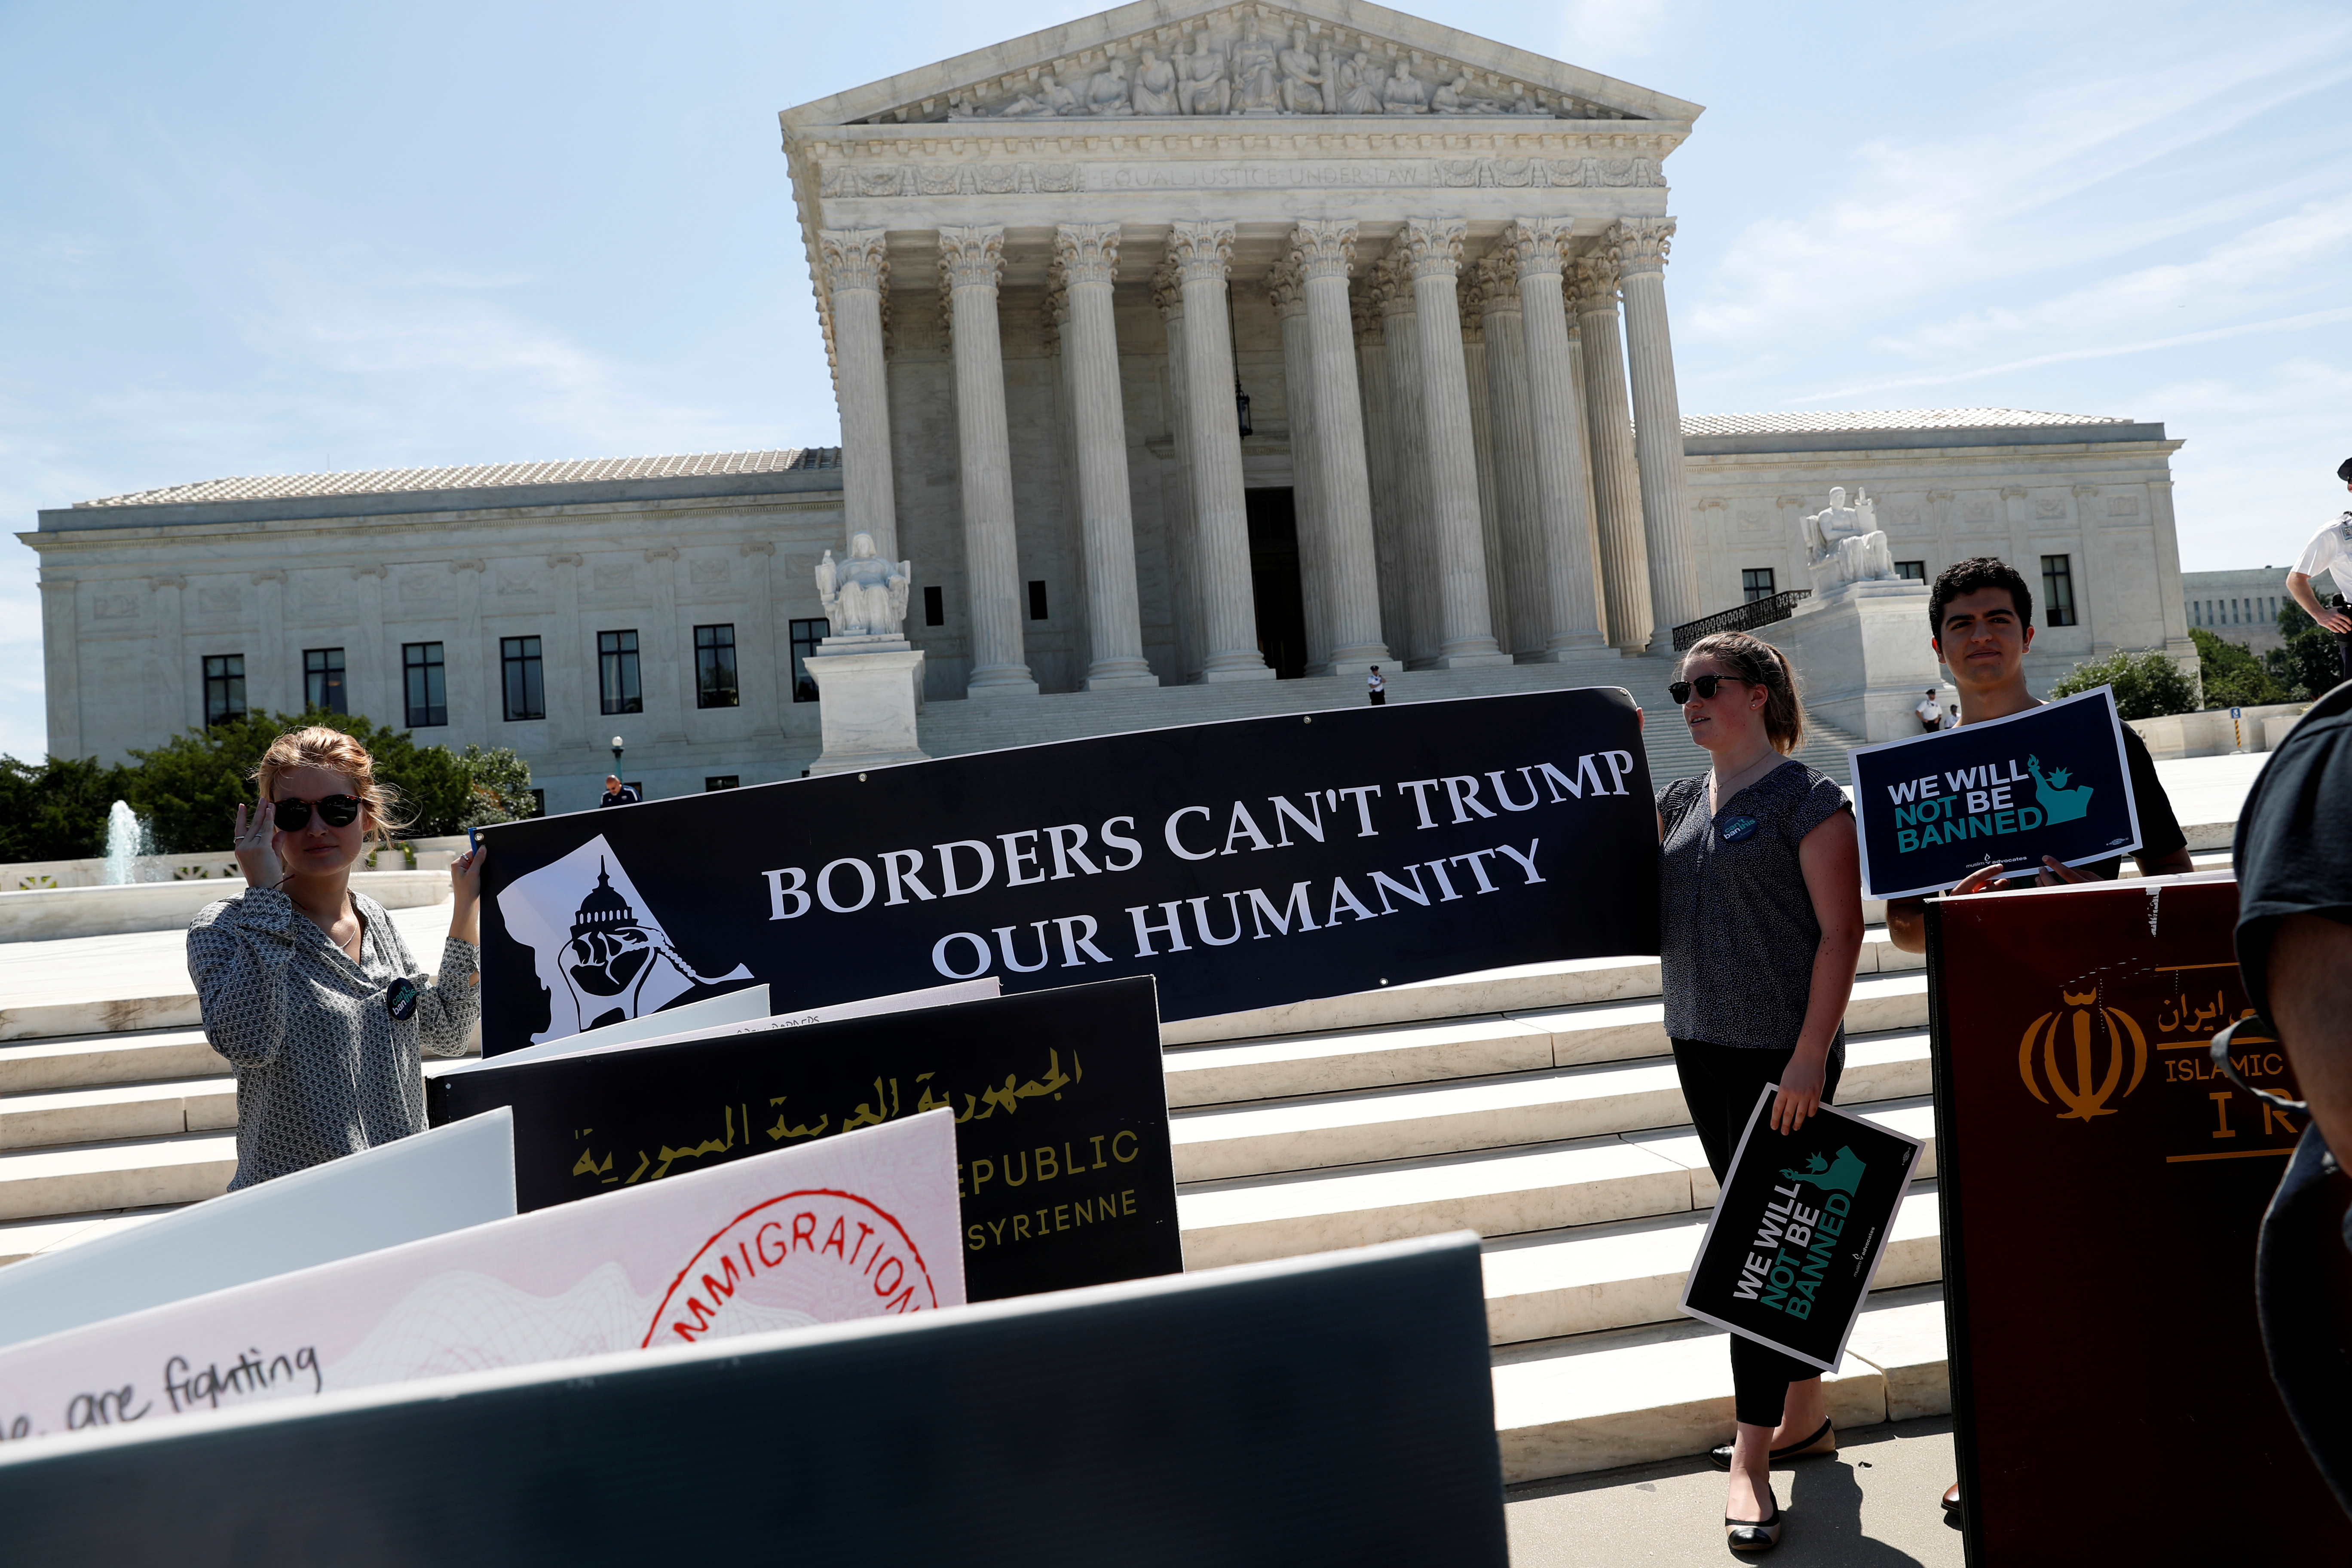 Immigration rights proponents demonstrate outside the U.S. Supreme Court in Washington, U.S., June 26, 2018. REUTERS/Leah Millis